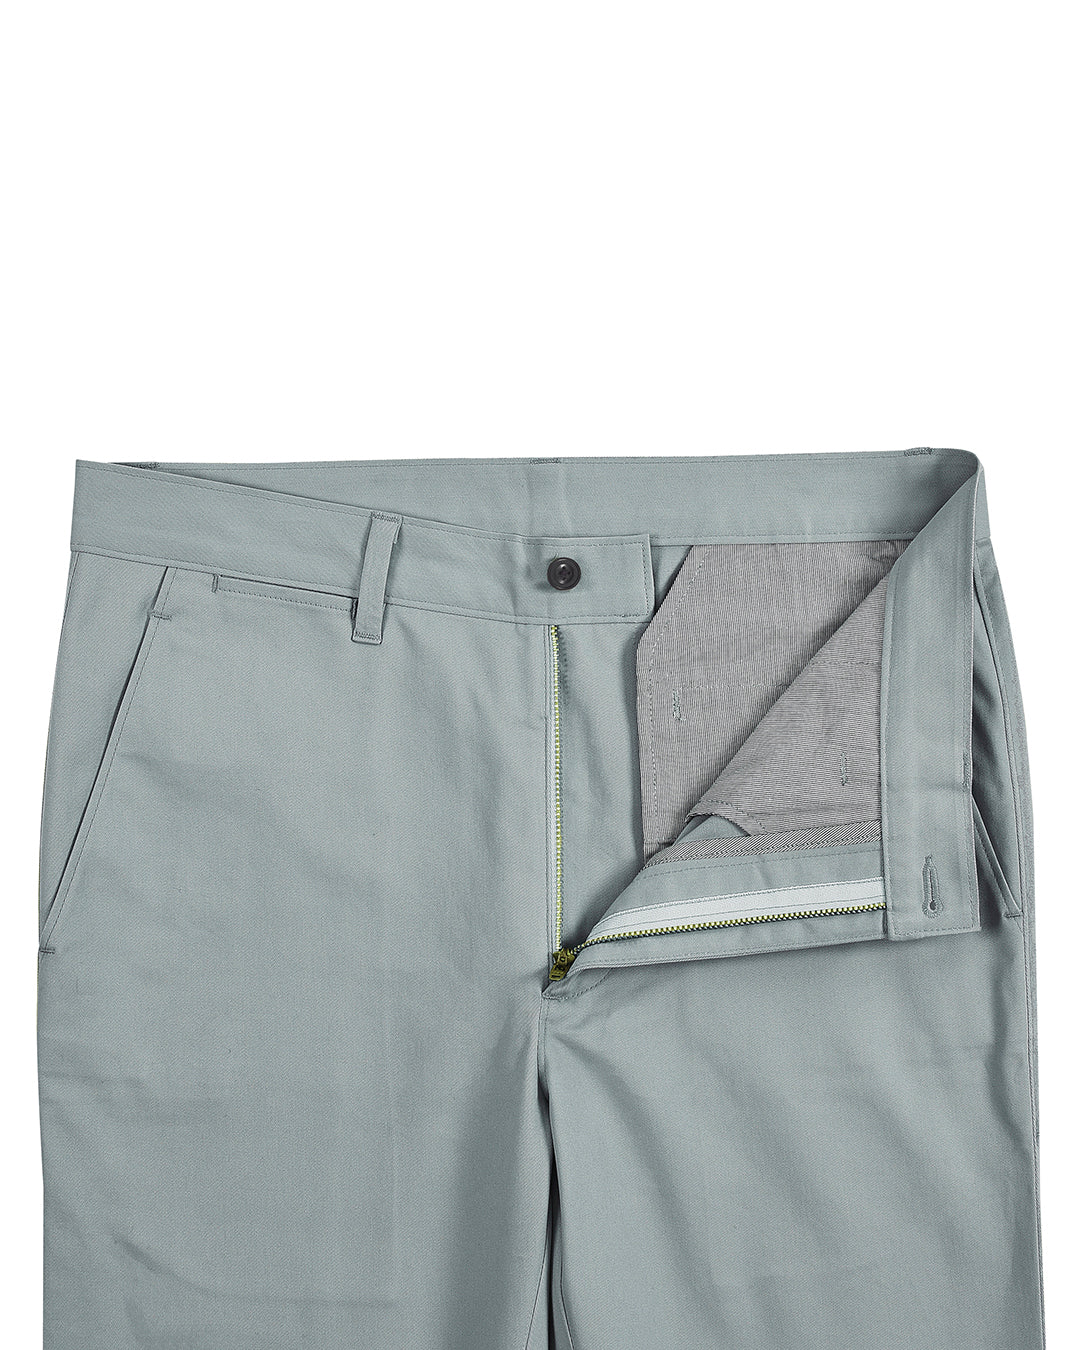 Front open view of custom Genoa Chino pants for men by Luxire in sage green